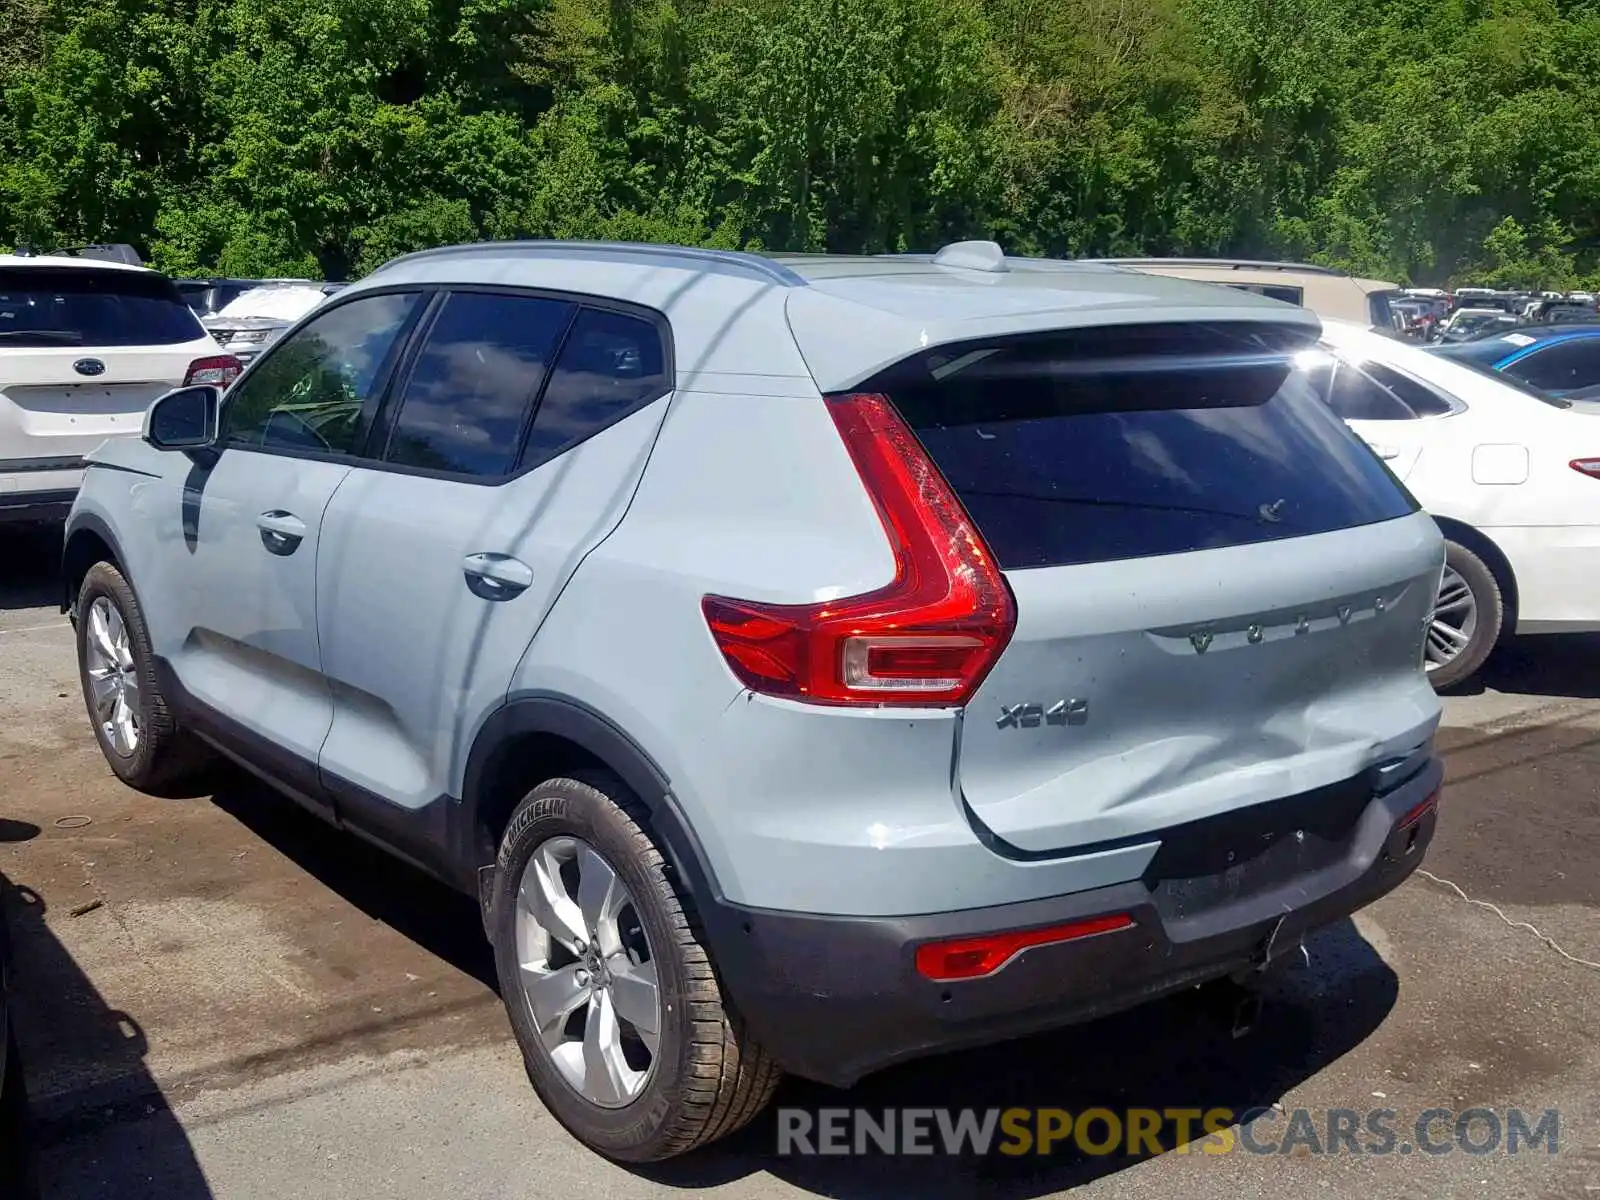 3 Photograph of a damaged car YV4162UK5K2062864 VOLVO XC40 T5 2019